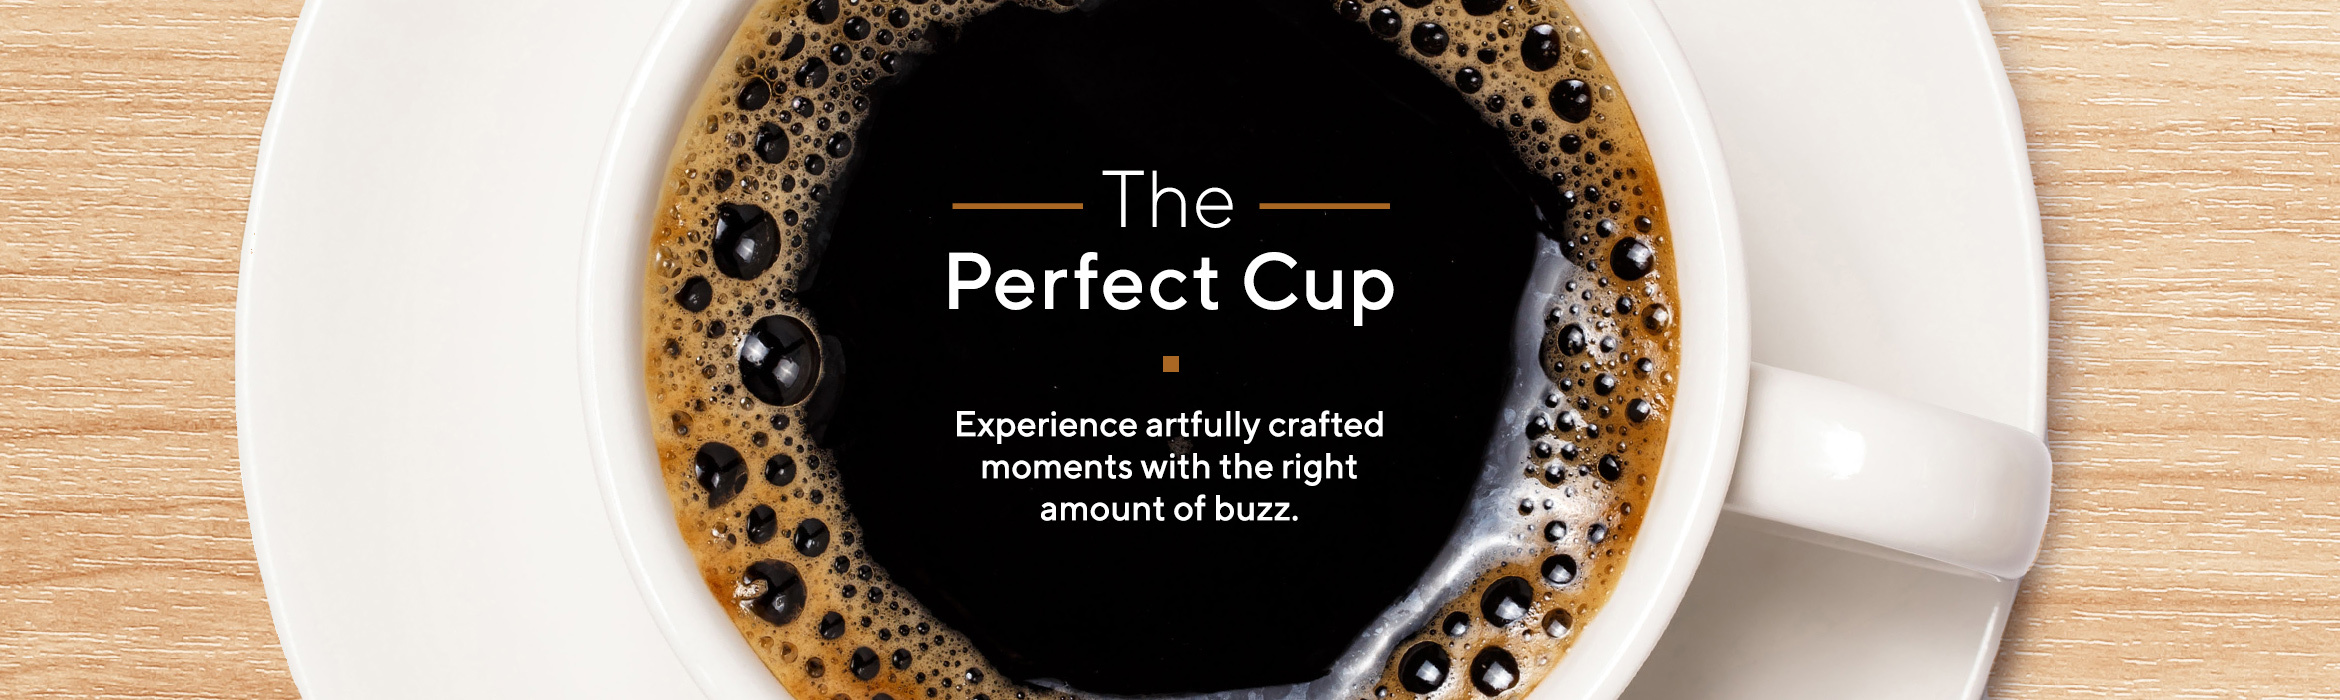 The Perfect Cup  Experience artfully crafted moments with the right amount of buzz. 